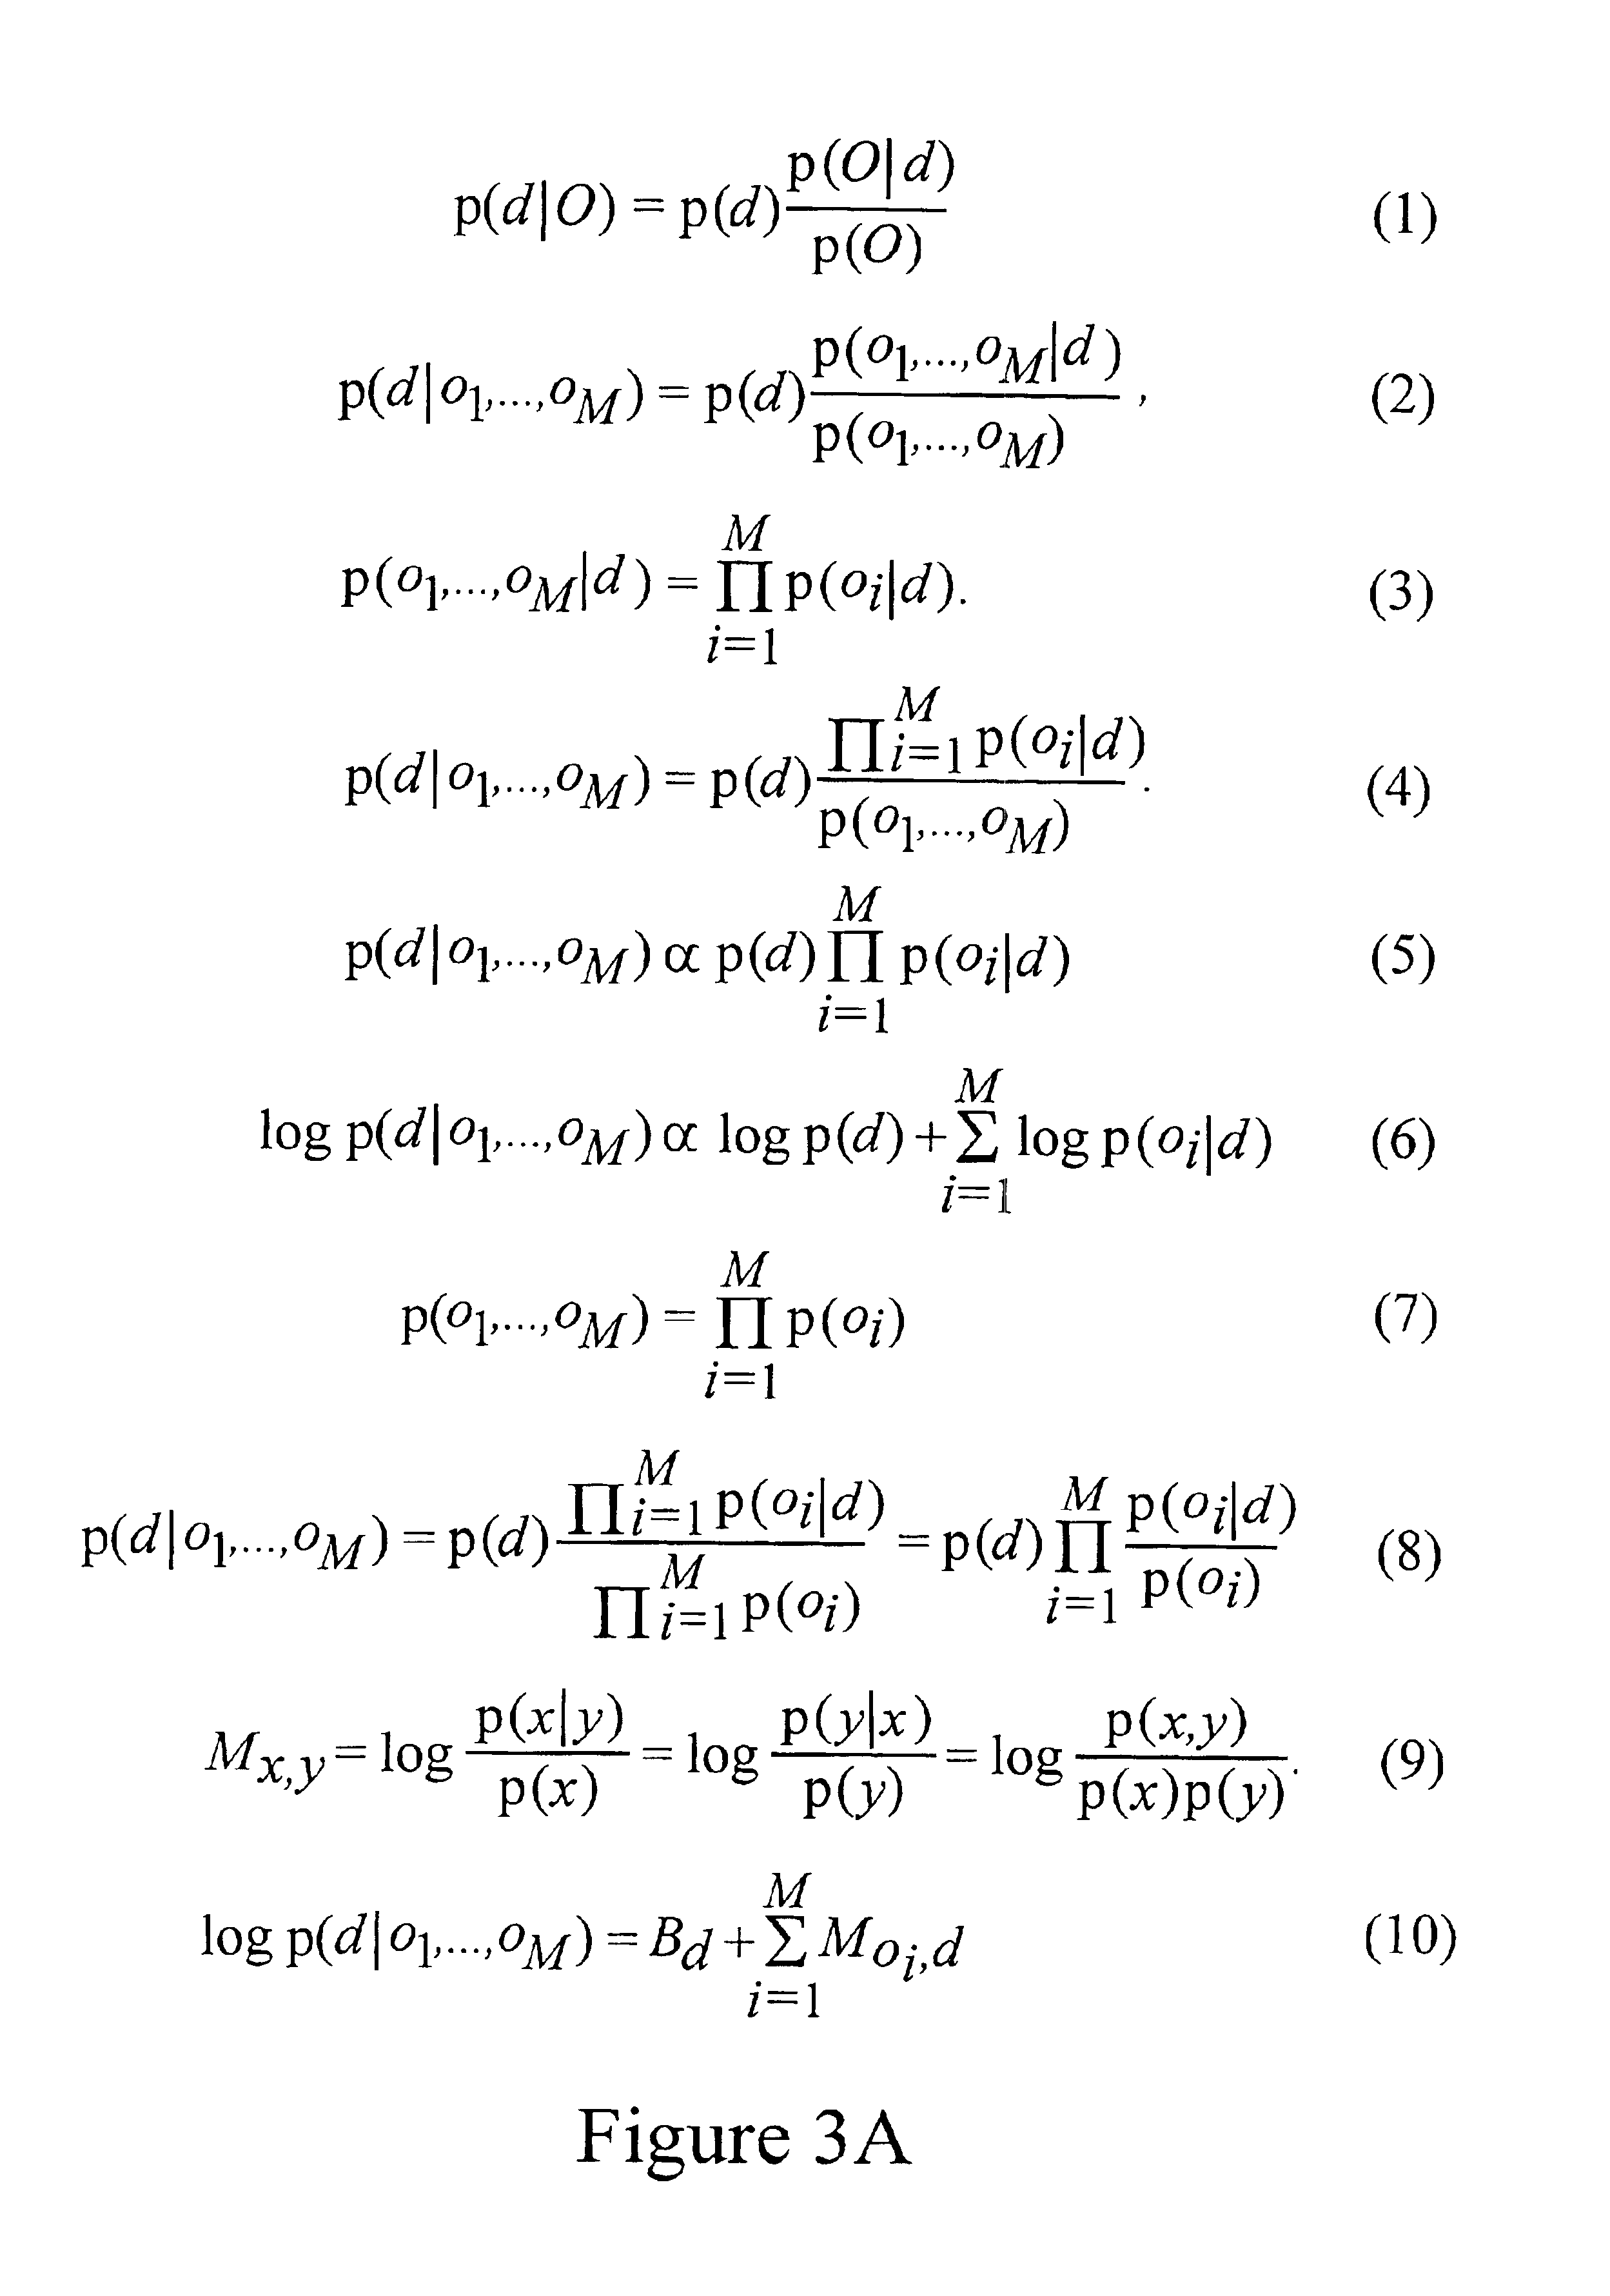 System and method for context-dependent probabilistic modeling of words and documents